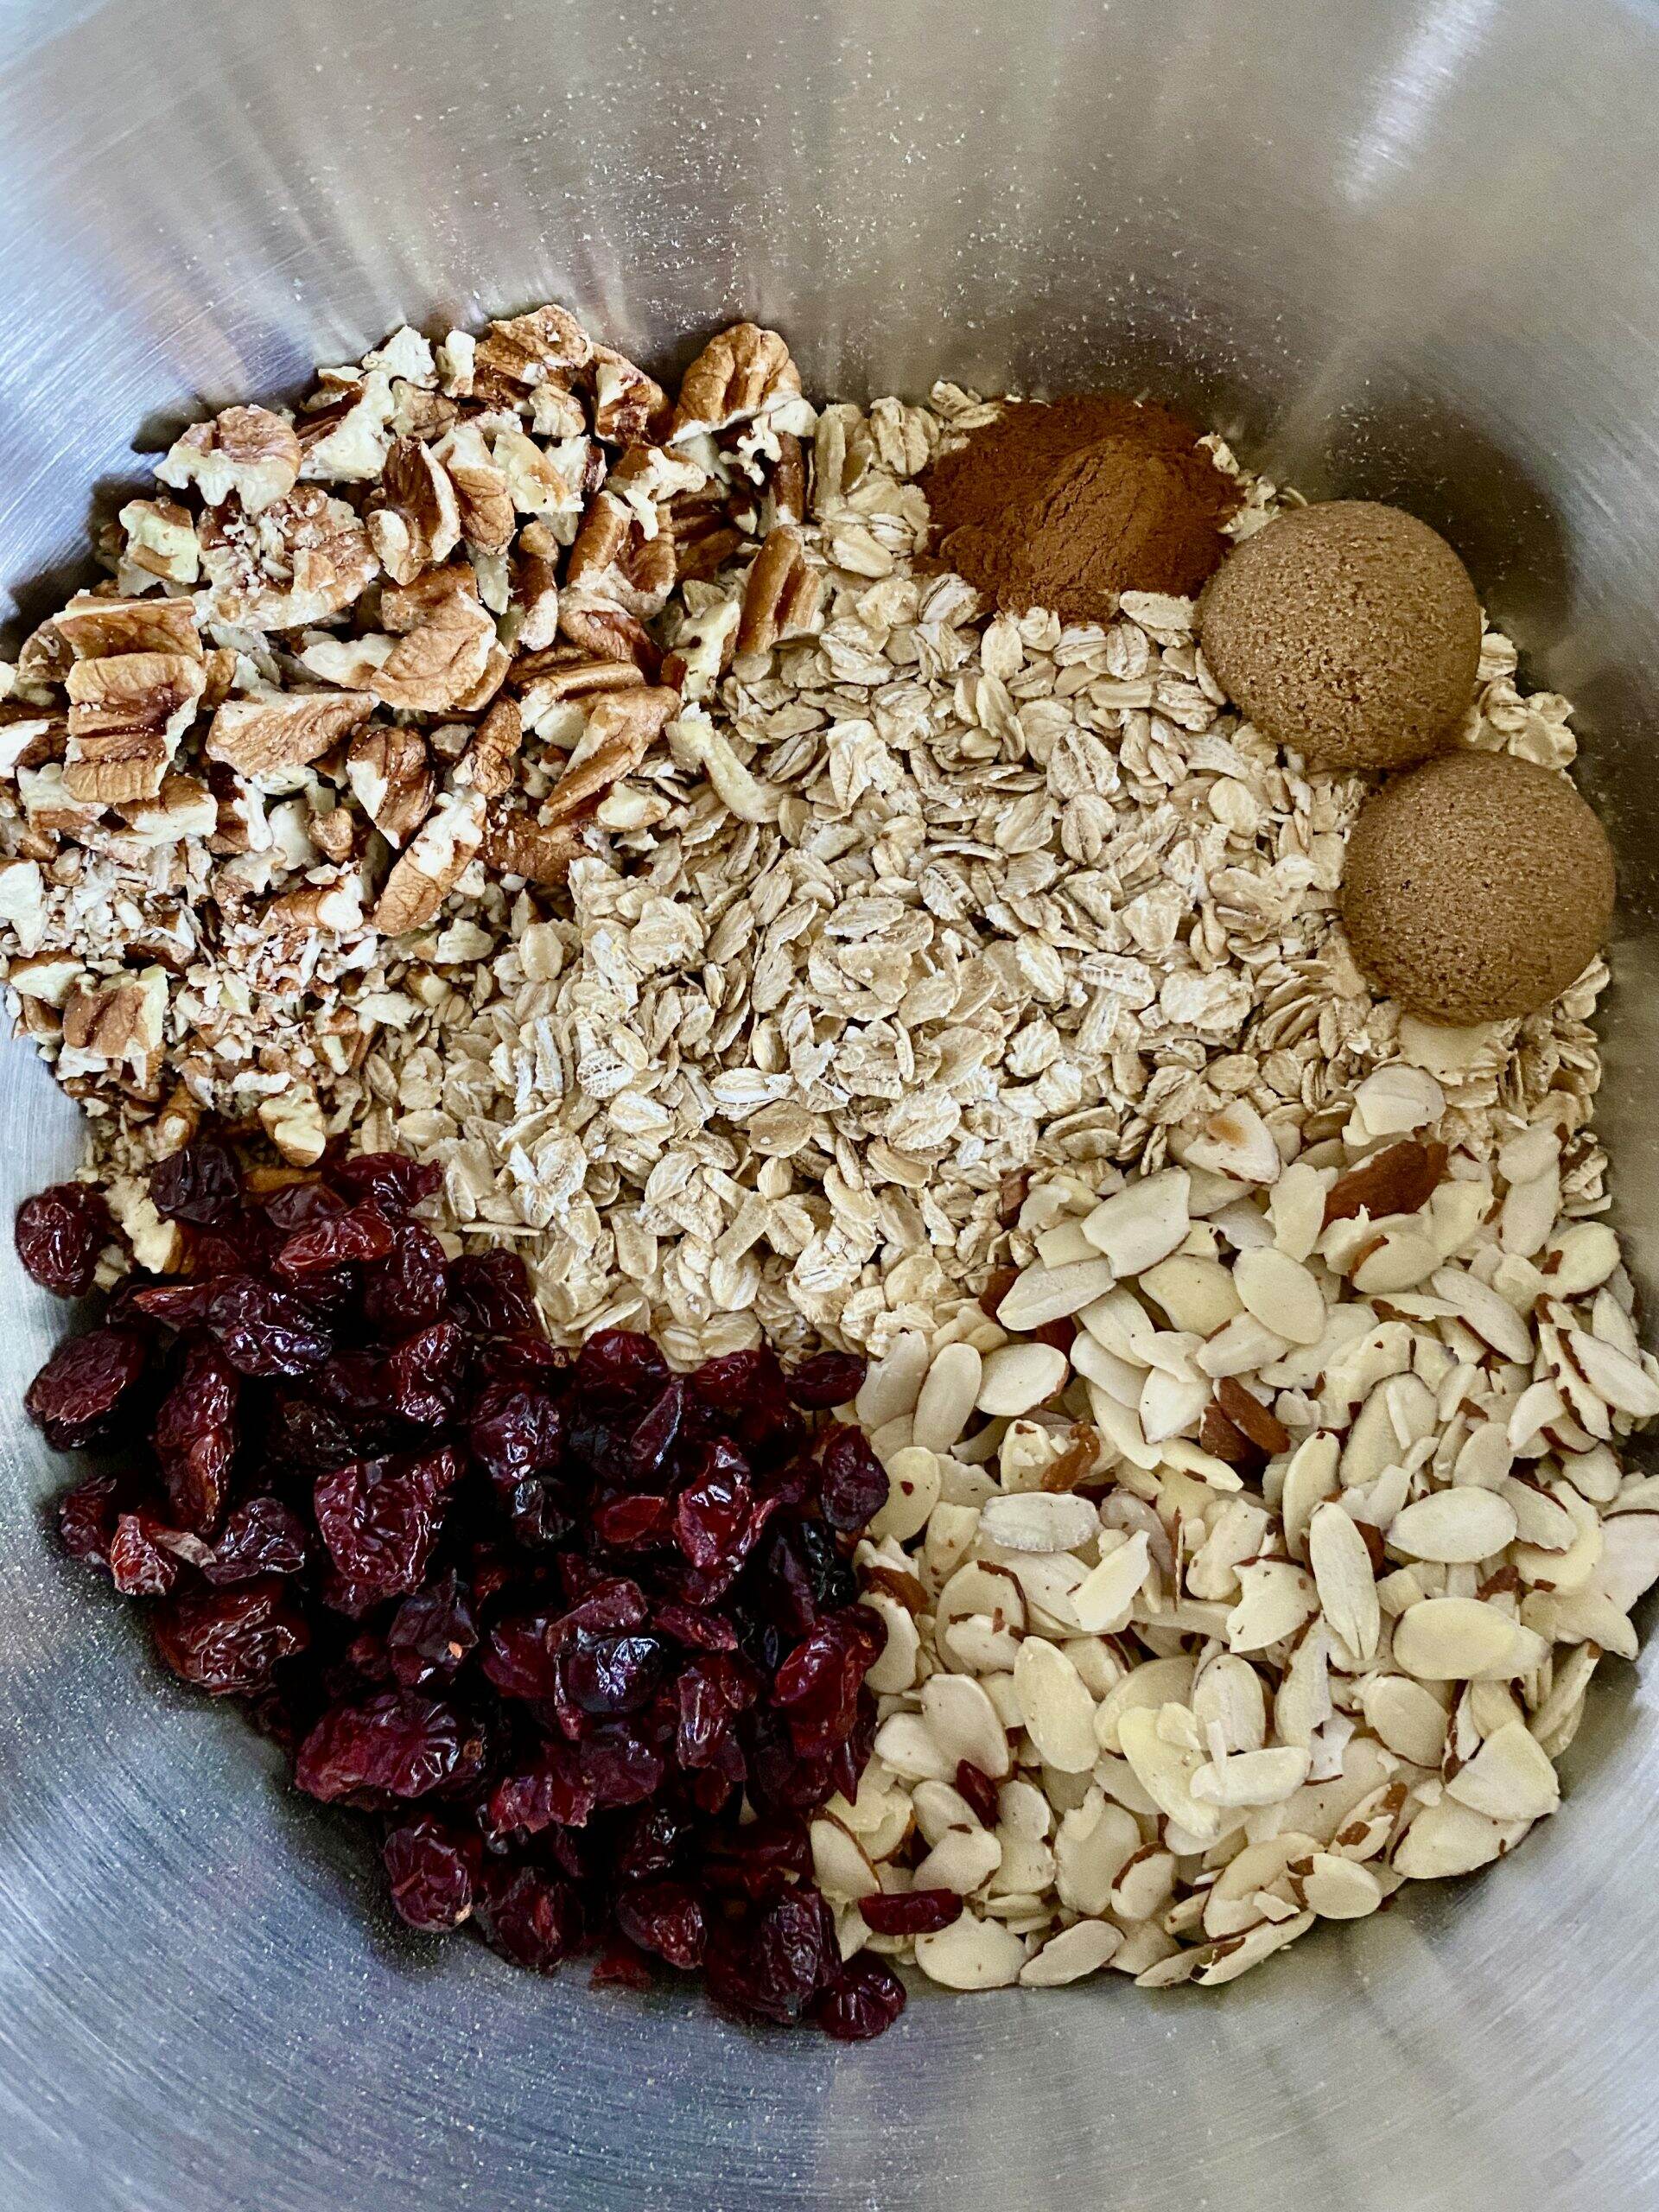 Making a Delicious and Nutritious Homemade Granola | Life at Bella Terra